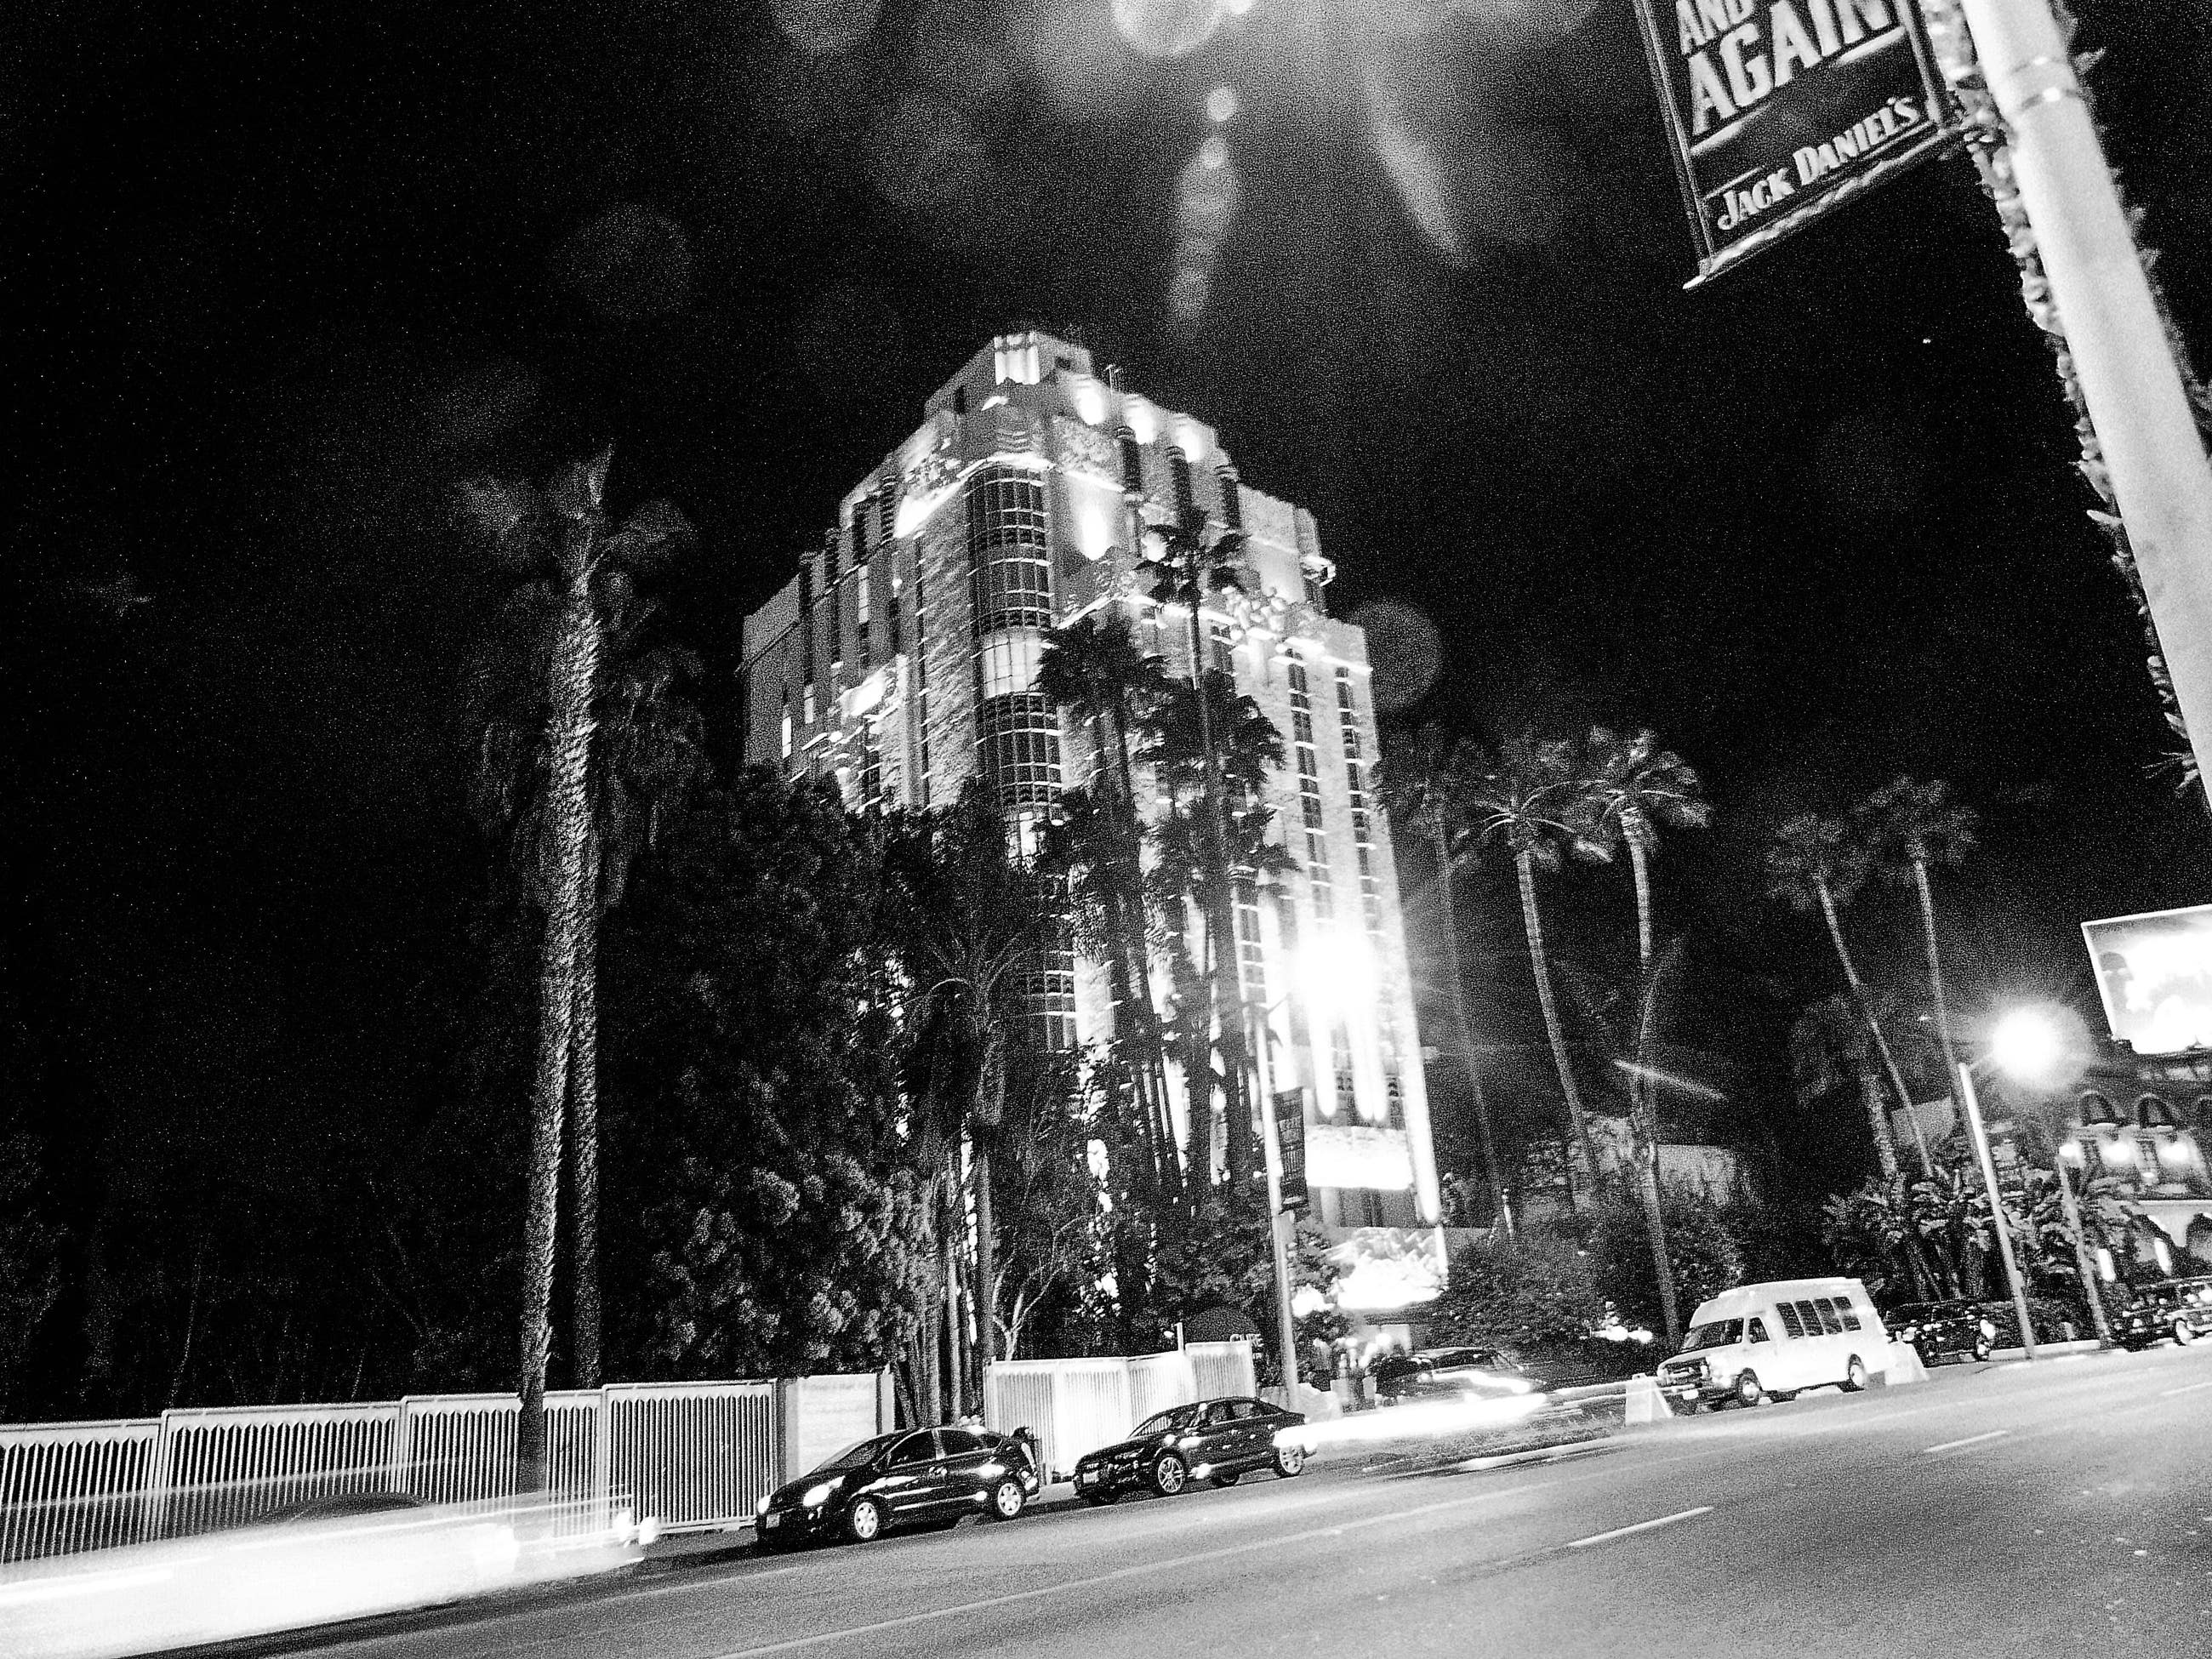 Sunset Tower Hotel on the Sunset Strip